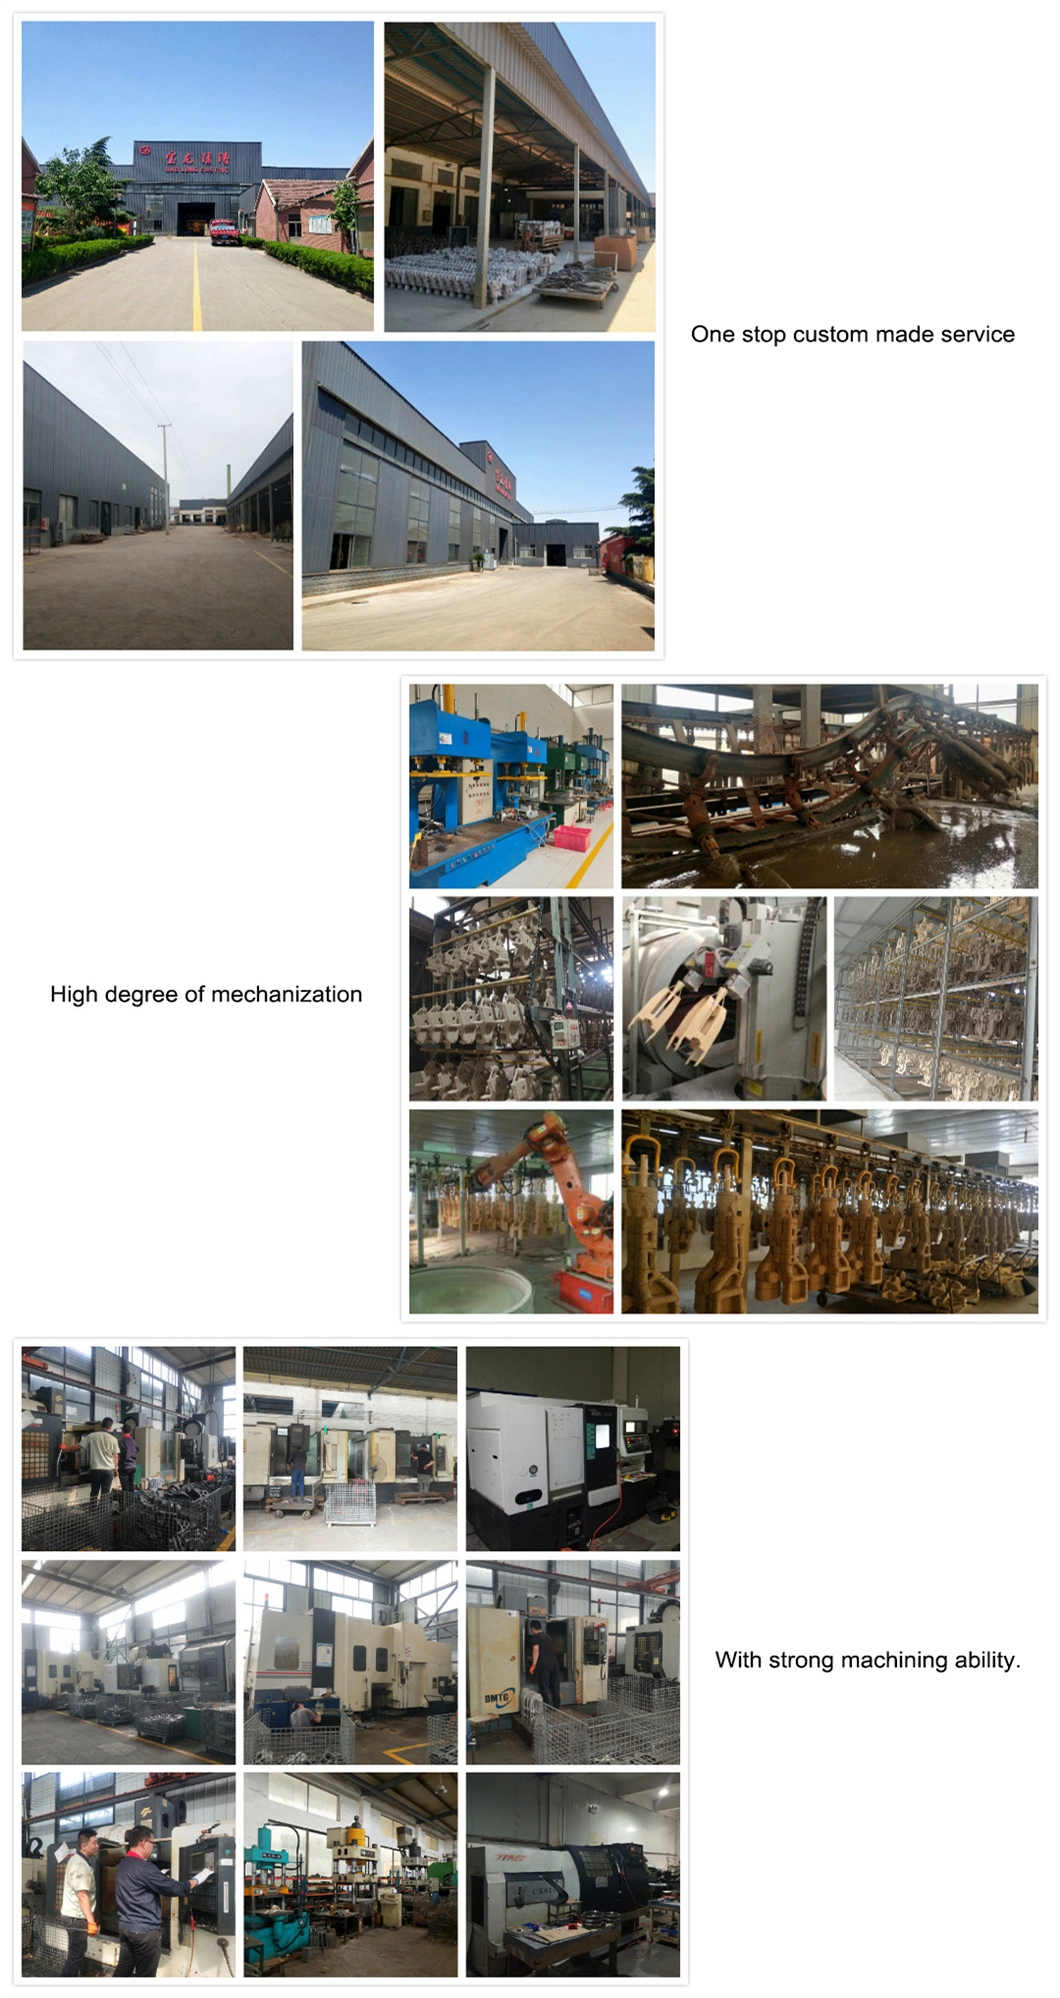 OEM Steel Casting Parts in Precision/Investment /Lost Wax/Gravity/Metal Casting